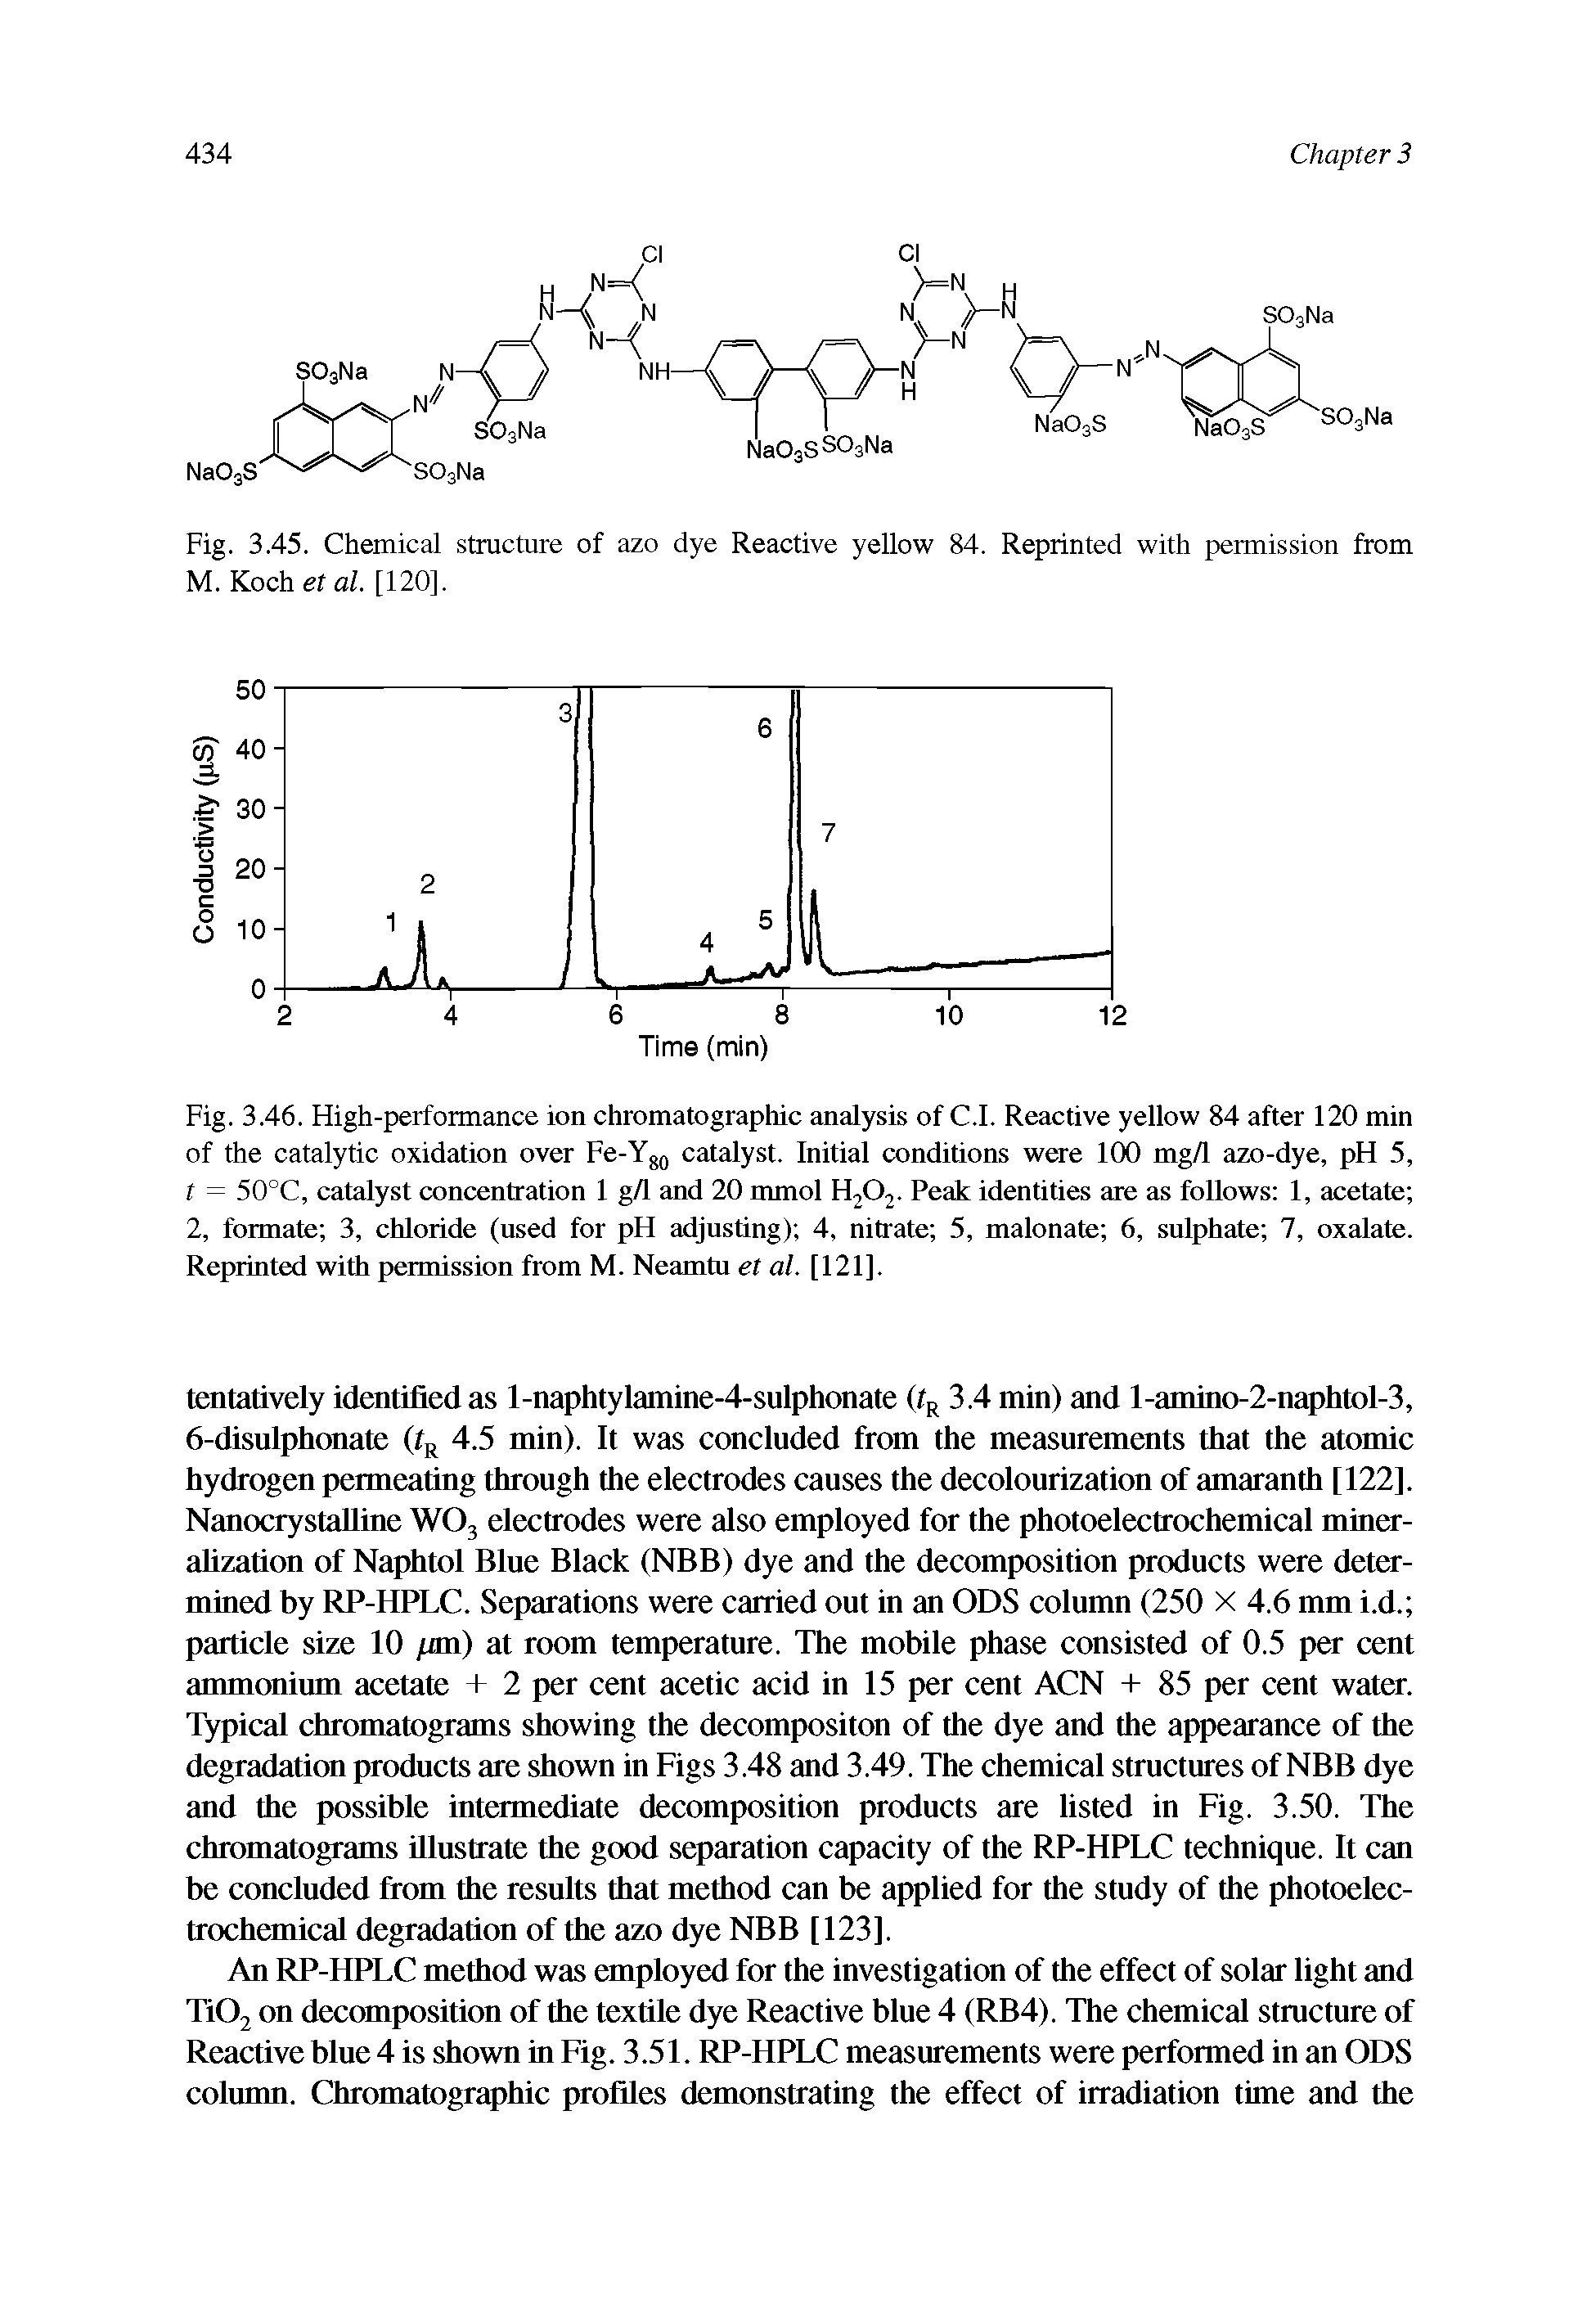 Fig. 3.46. High-performance ion chromatographic analysis of C.I. Reactive yellow 84 after 120 min of the catalytic oxidation over Fe-Y80 catalyst. Initial conditions were 100 mg/1 azo-dye, pH 5, t = 50°C, catalyst concentration 1 g/1 and 20 mmol H202. Peak identities are as follows 1, acetate 2, formate 3, chloride (used for pH adjusting) 4, nitrate 5, malonate 6, sulphate 7, oxalate. Reprinted with permission from M. Neamtu et al. [121].